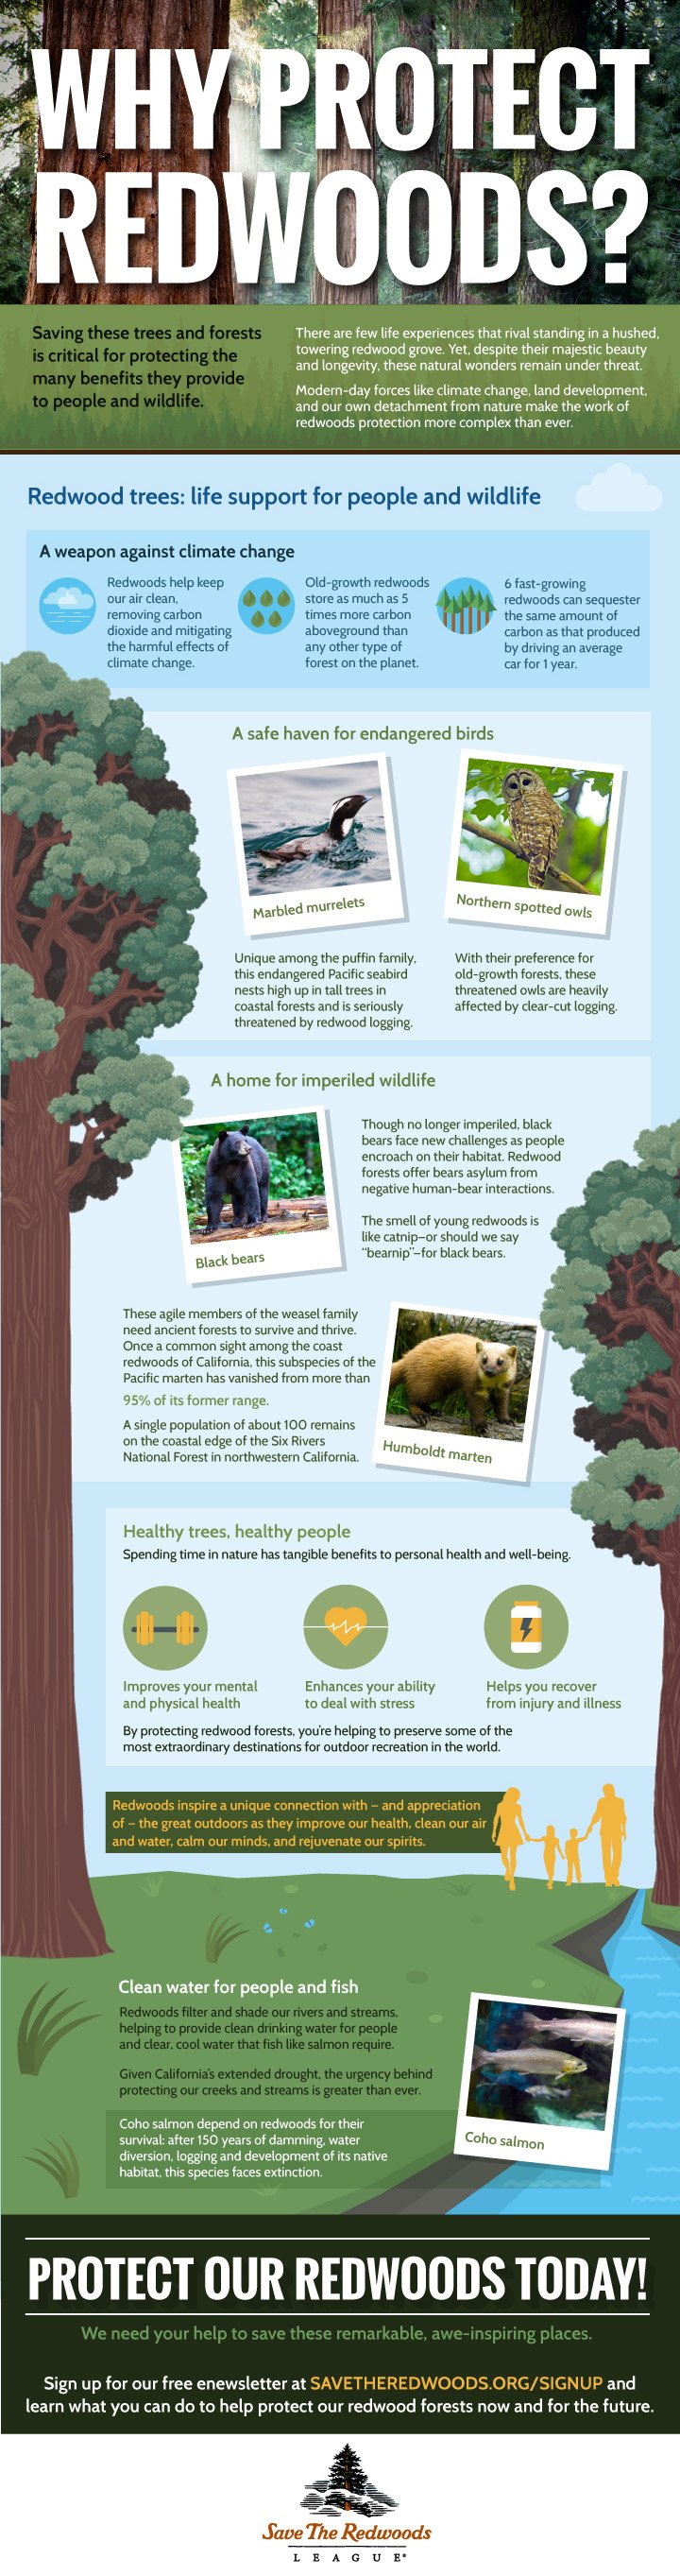 Infographic describes the benefits that redwoods provide for people and wildlife.